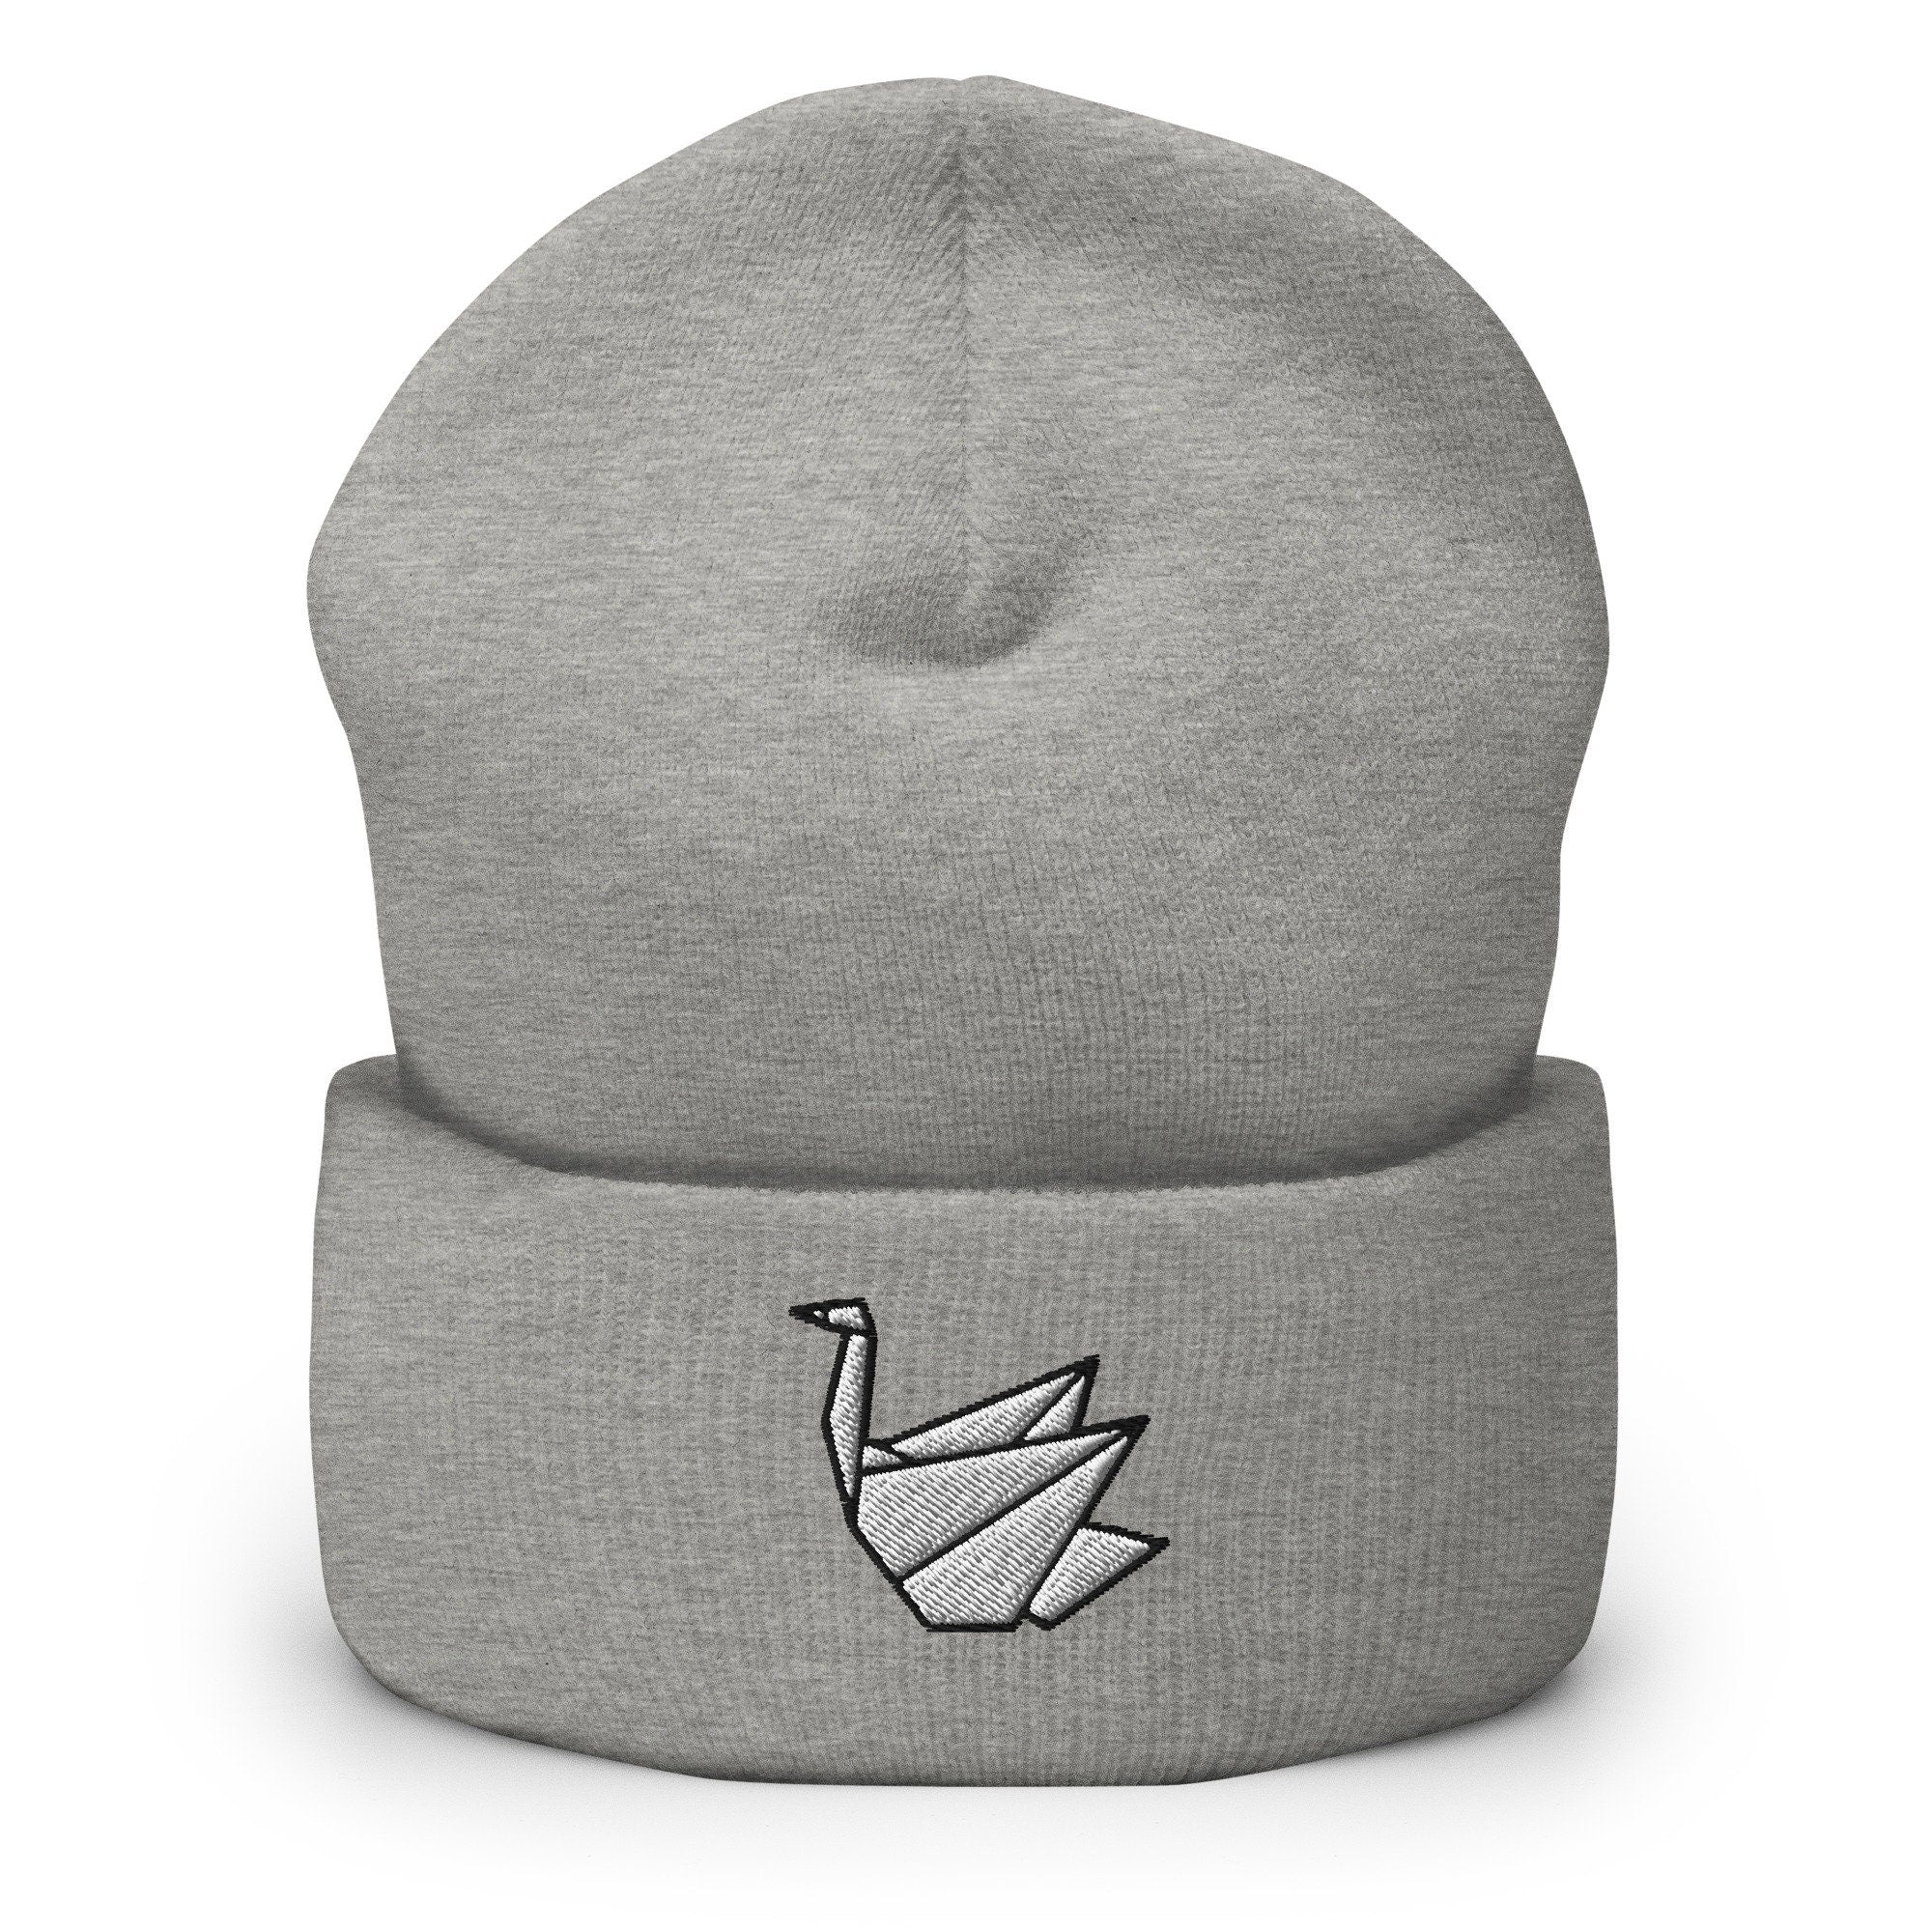 Paper Swan Embroidered Beanie, Handmade Cuffed Knit Unisex Slouchy Adult Winter Hat Cap Gift